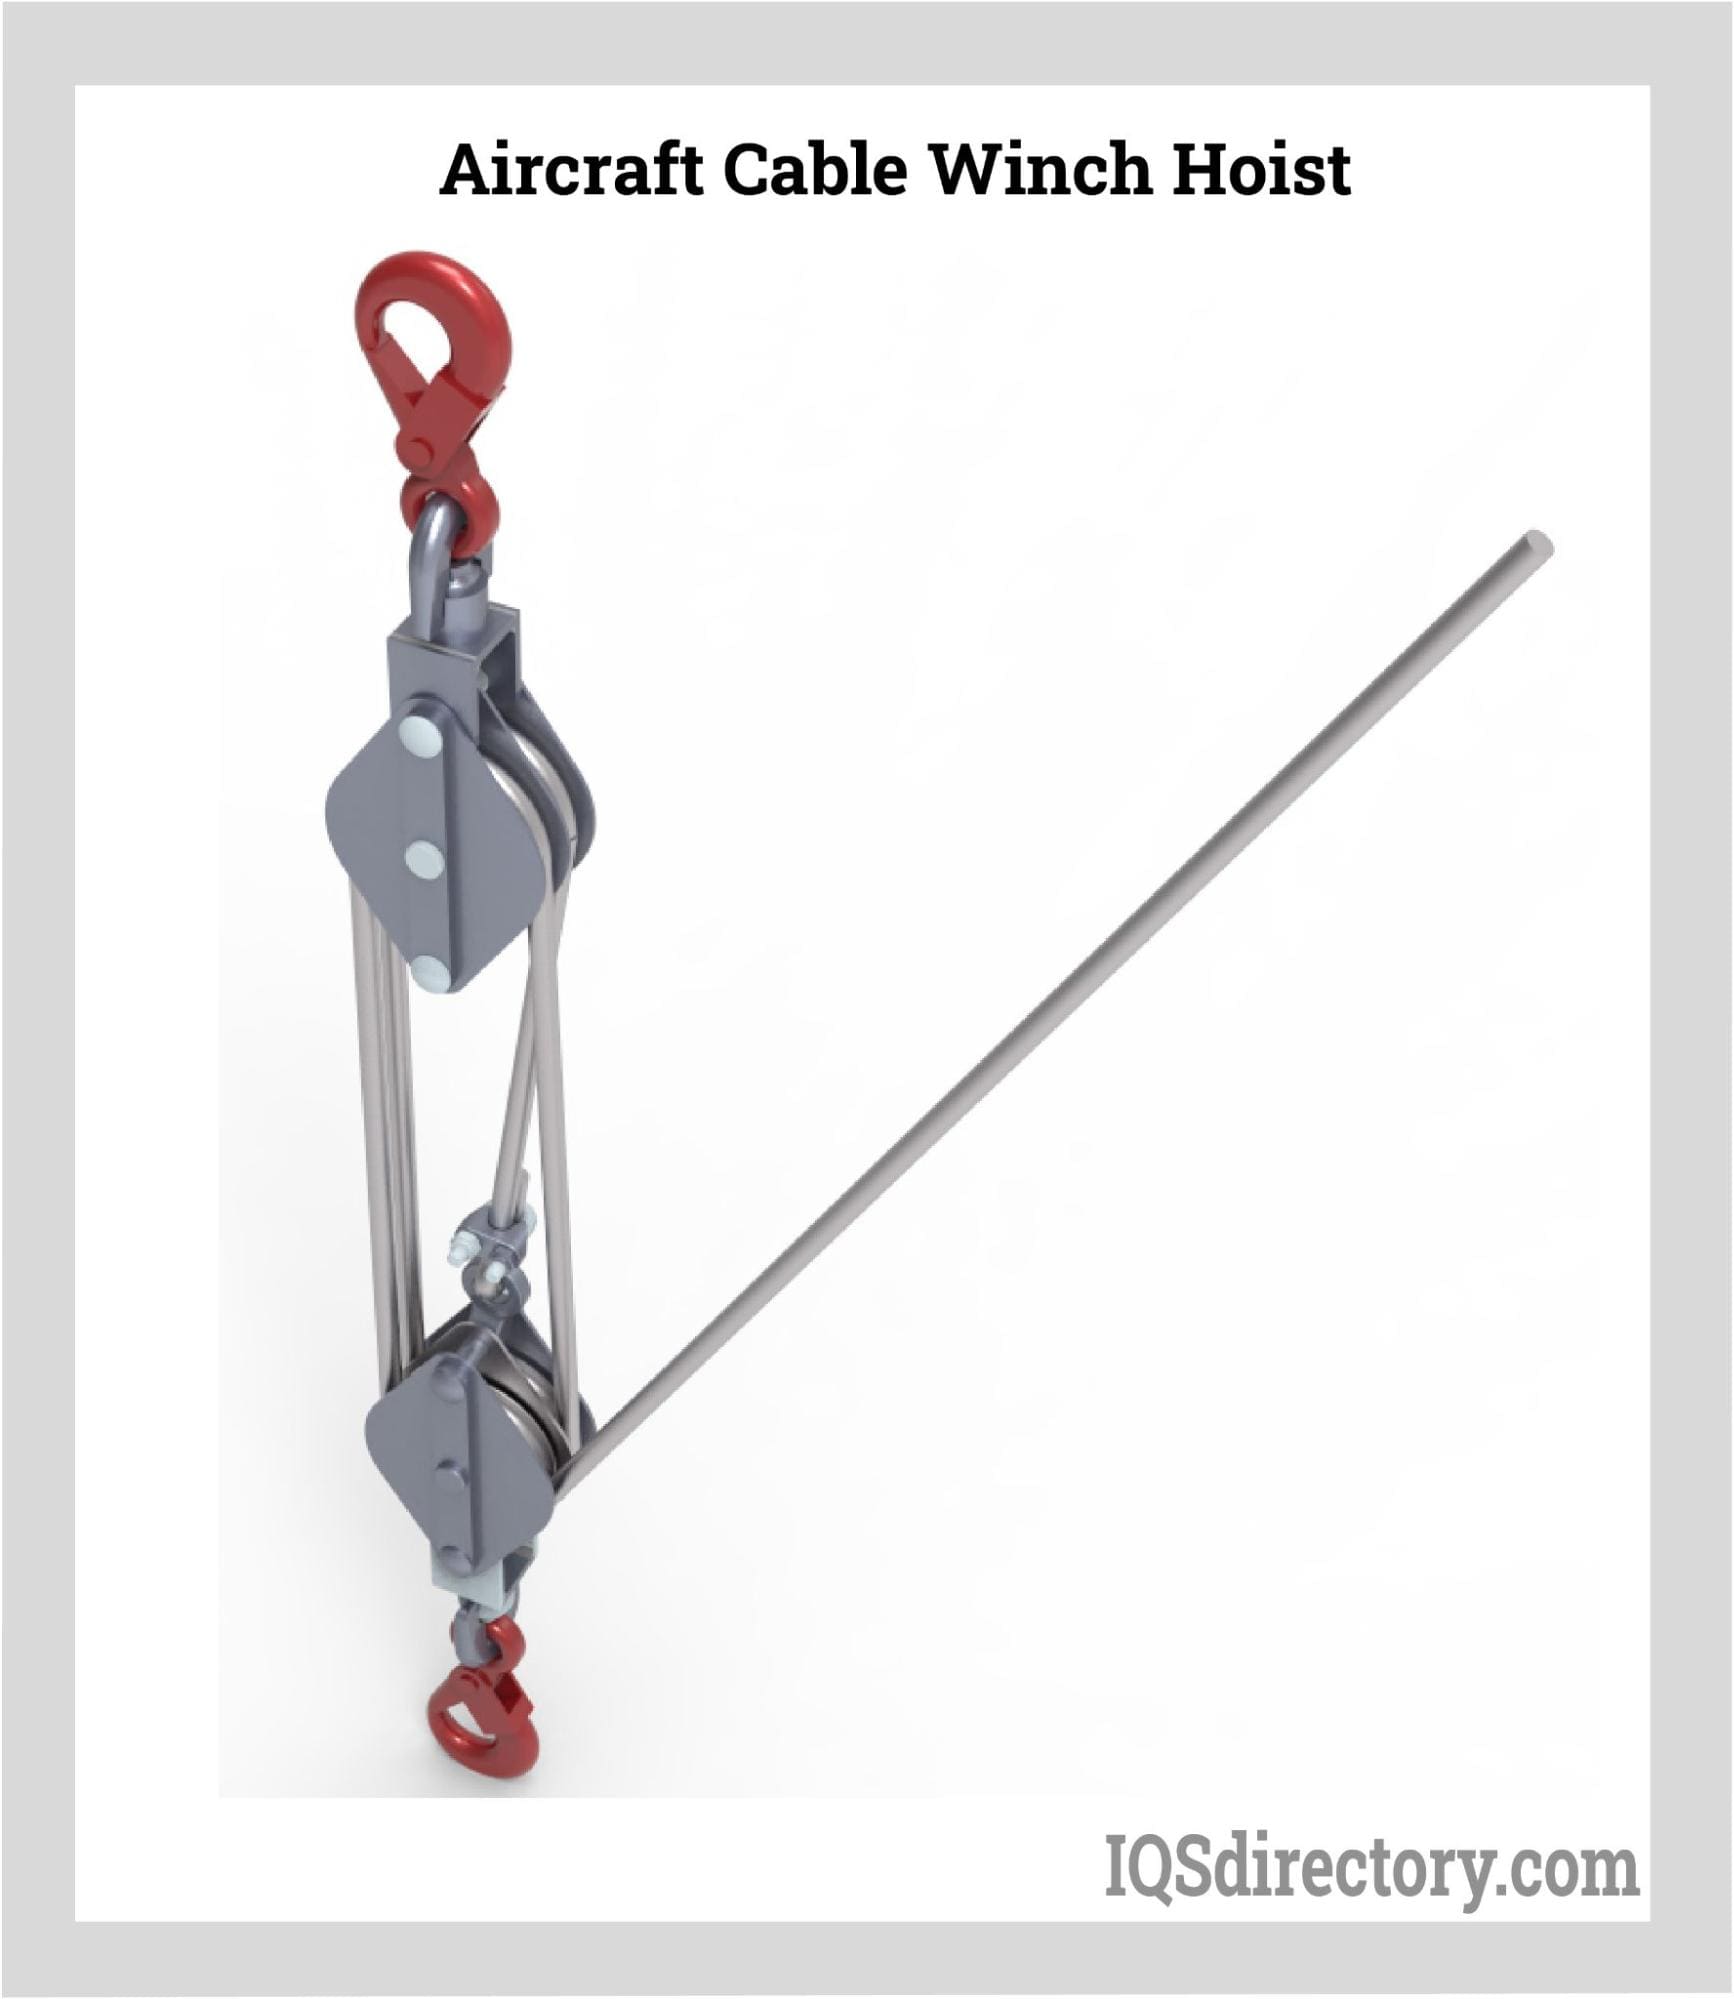 Aircraft Cable Winch Hoist